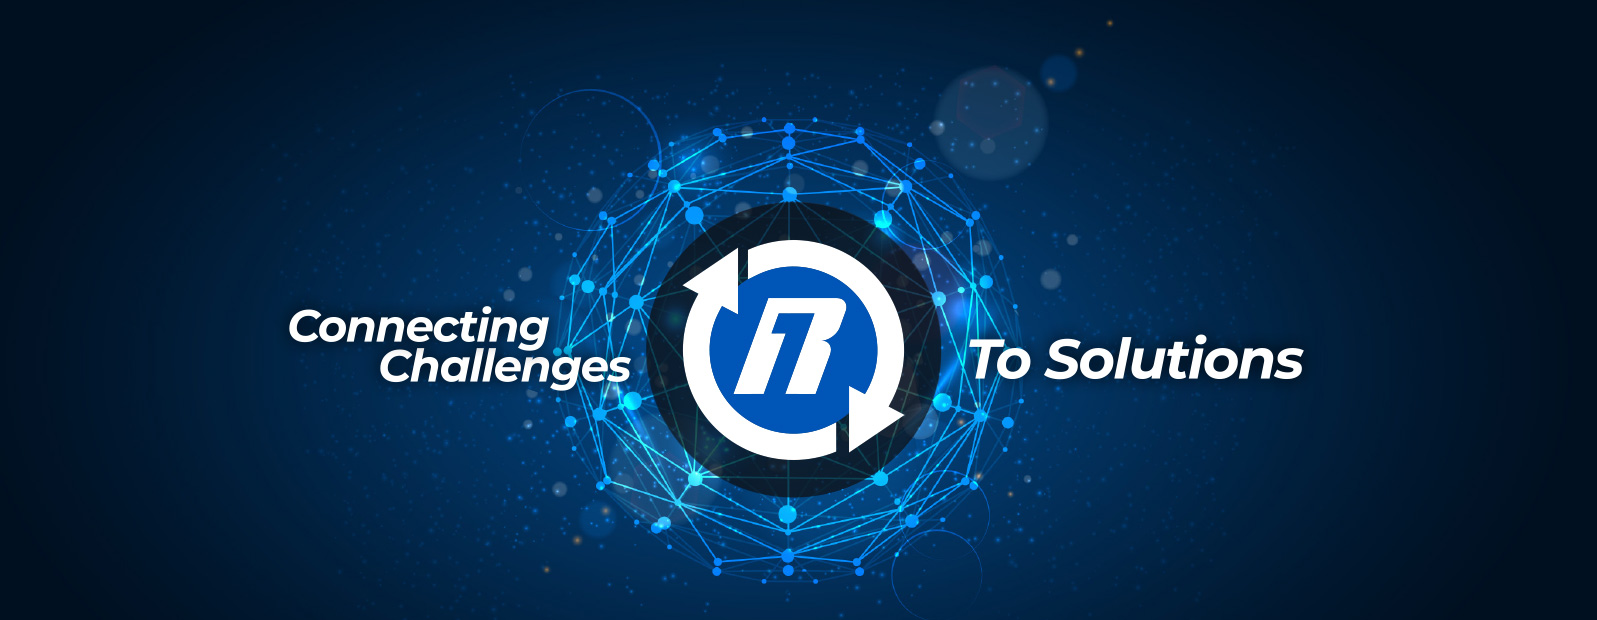 Resolve One Connecting Challenges to Solutions